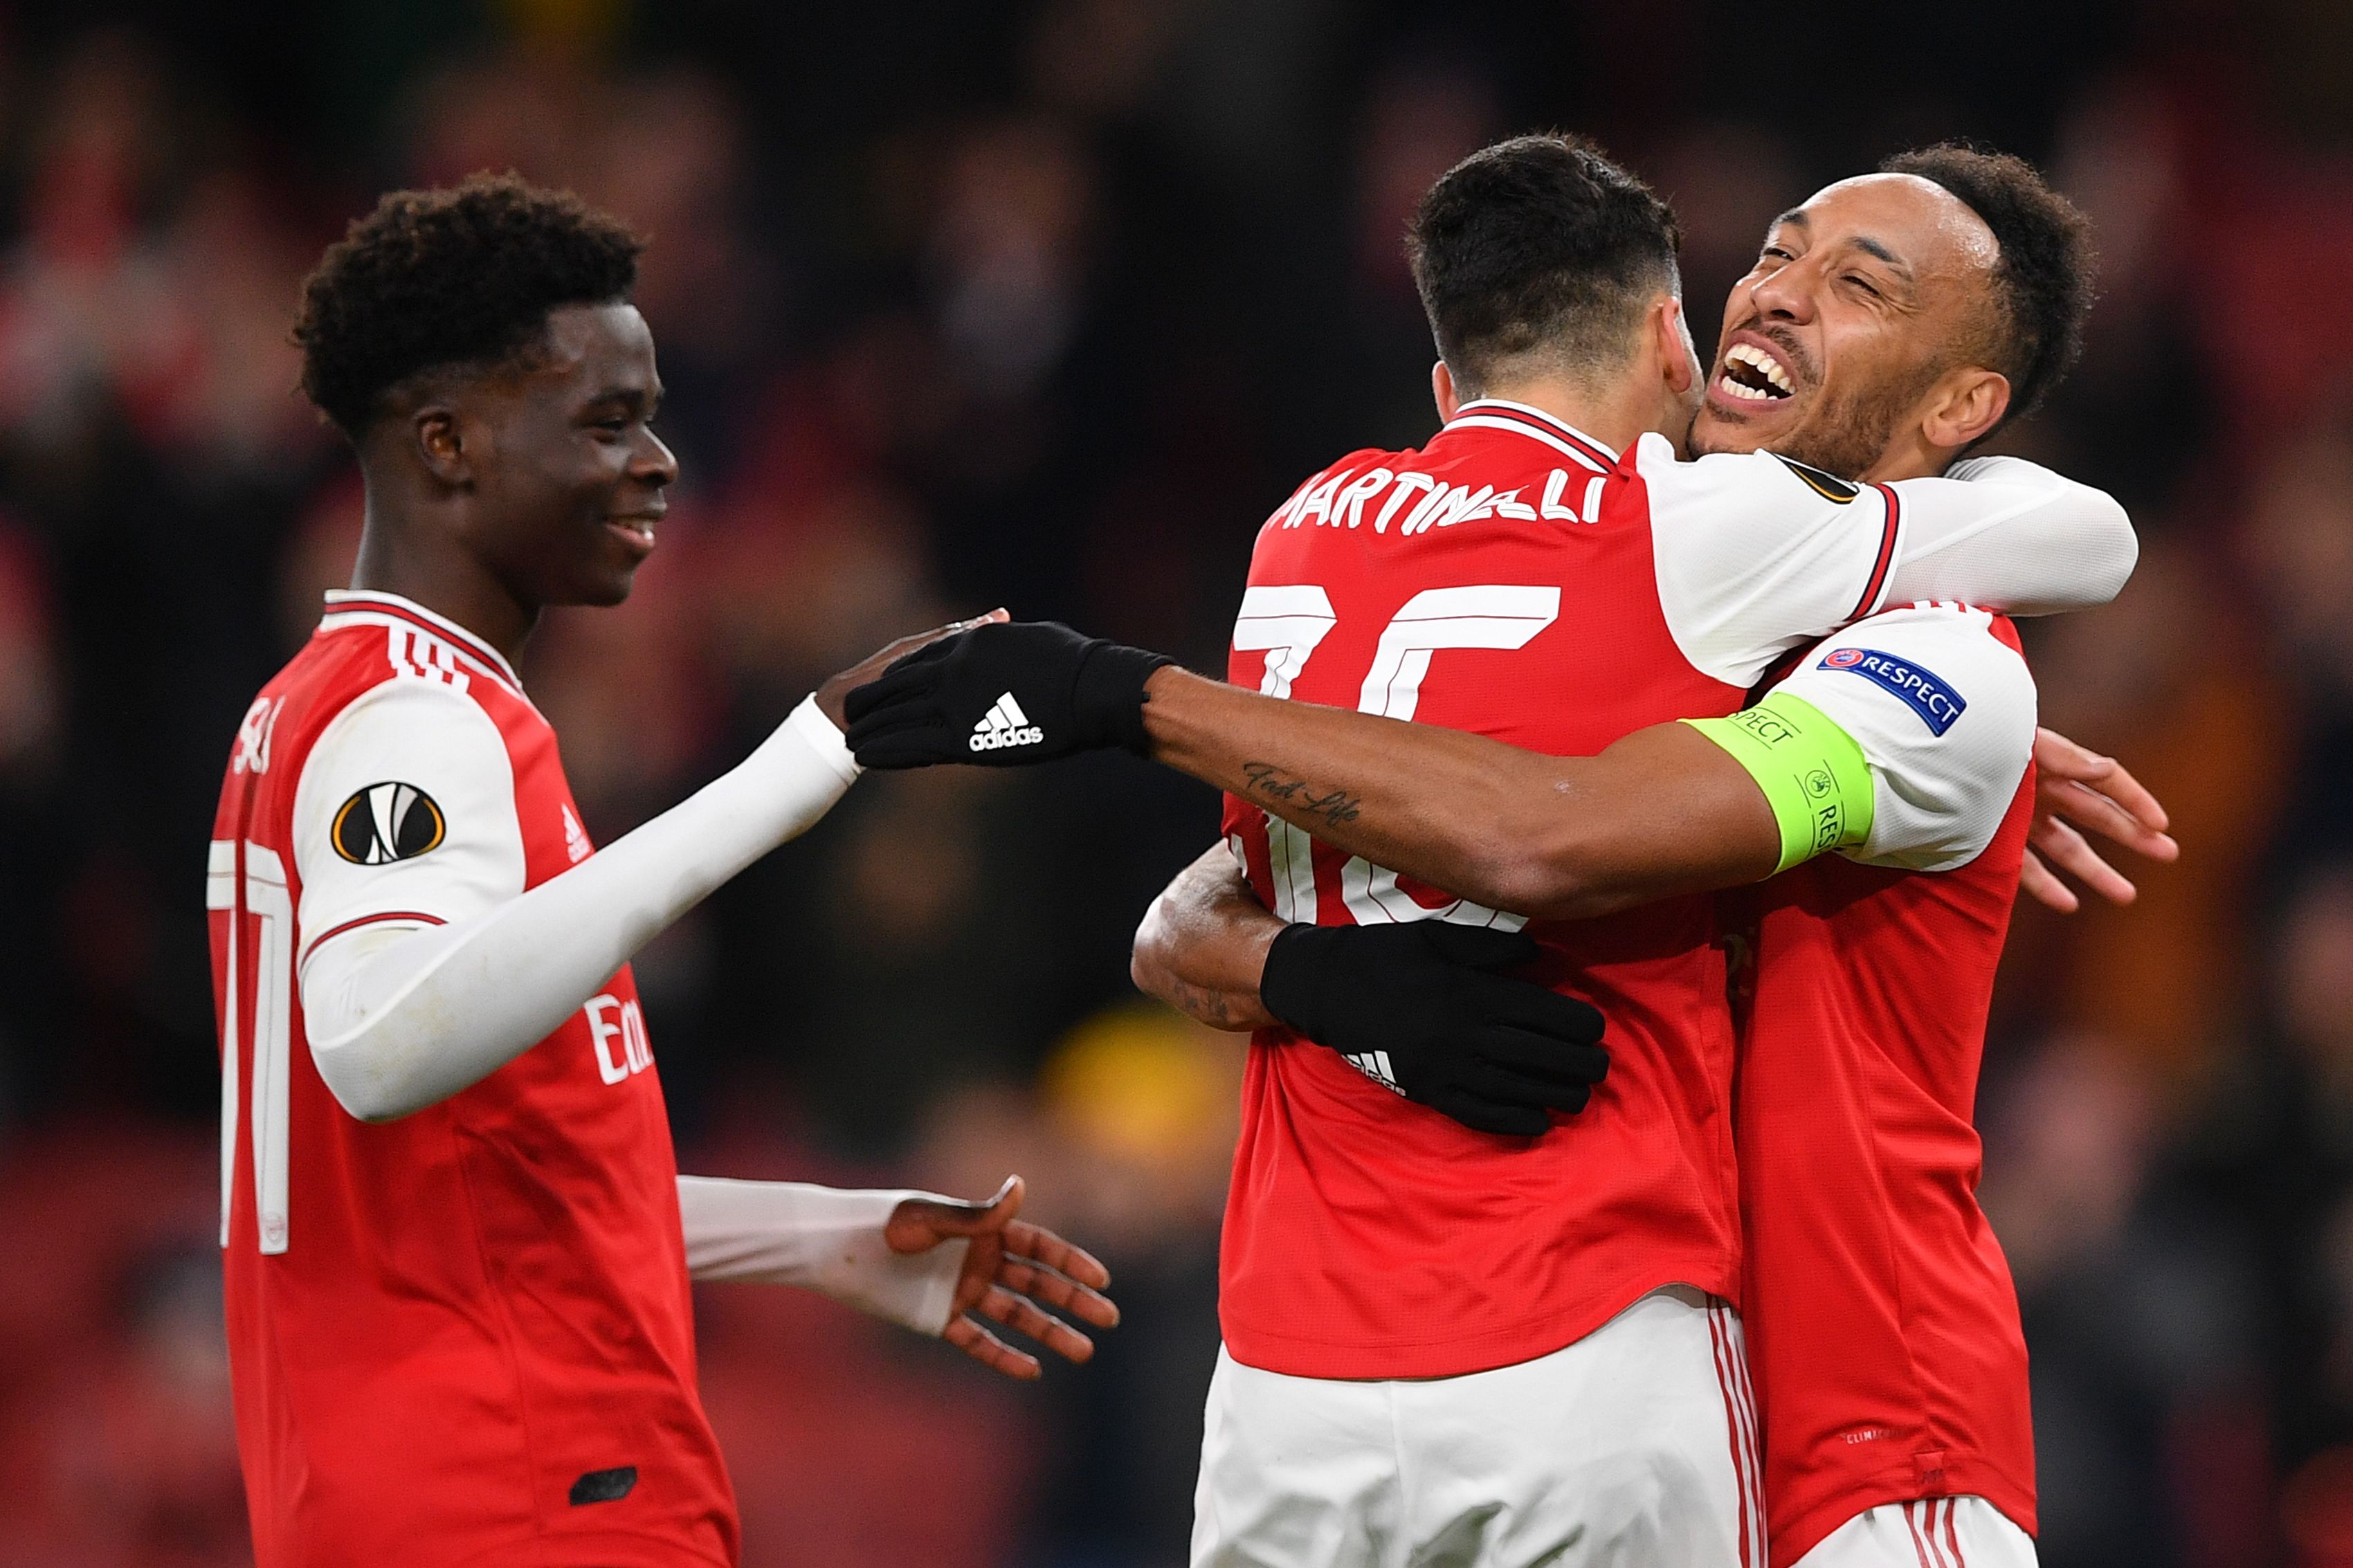 Arsenal's Gabonese striker Pierre-Emerick Aubameyang (R)bcelebrates scoring his team's first goal with Arsenal's Brazilian striker Gabriel Martinelli during their UEFA Europa league Group F football match between Arsenal and Eintracht Frankfurt at the Emirates stadium in London on November 28, 2019. (Photo by DANIEL LEAL-OLIVAS / AFP) (Photo by DANIEL LEAL-OLIVAS/AFP via Getty Images)